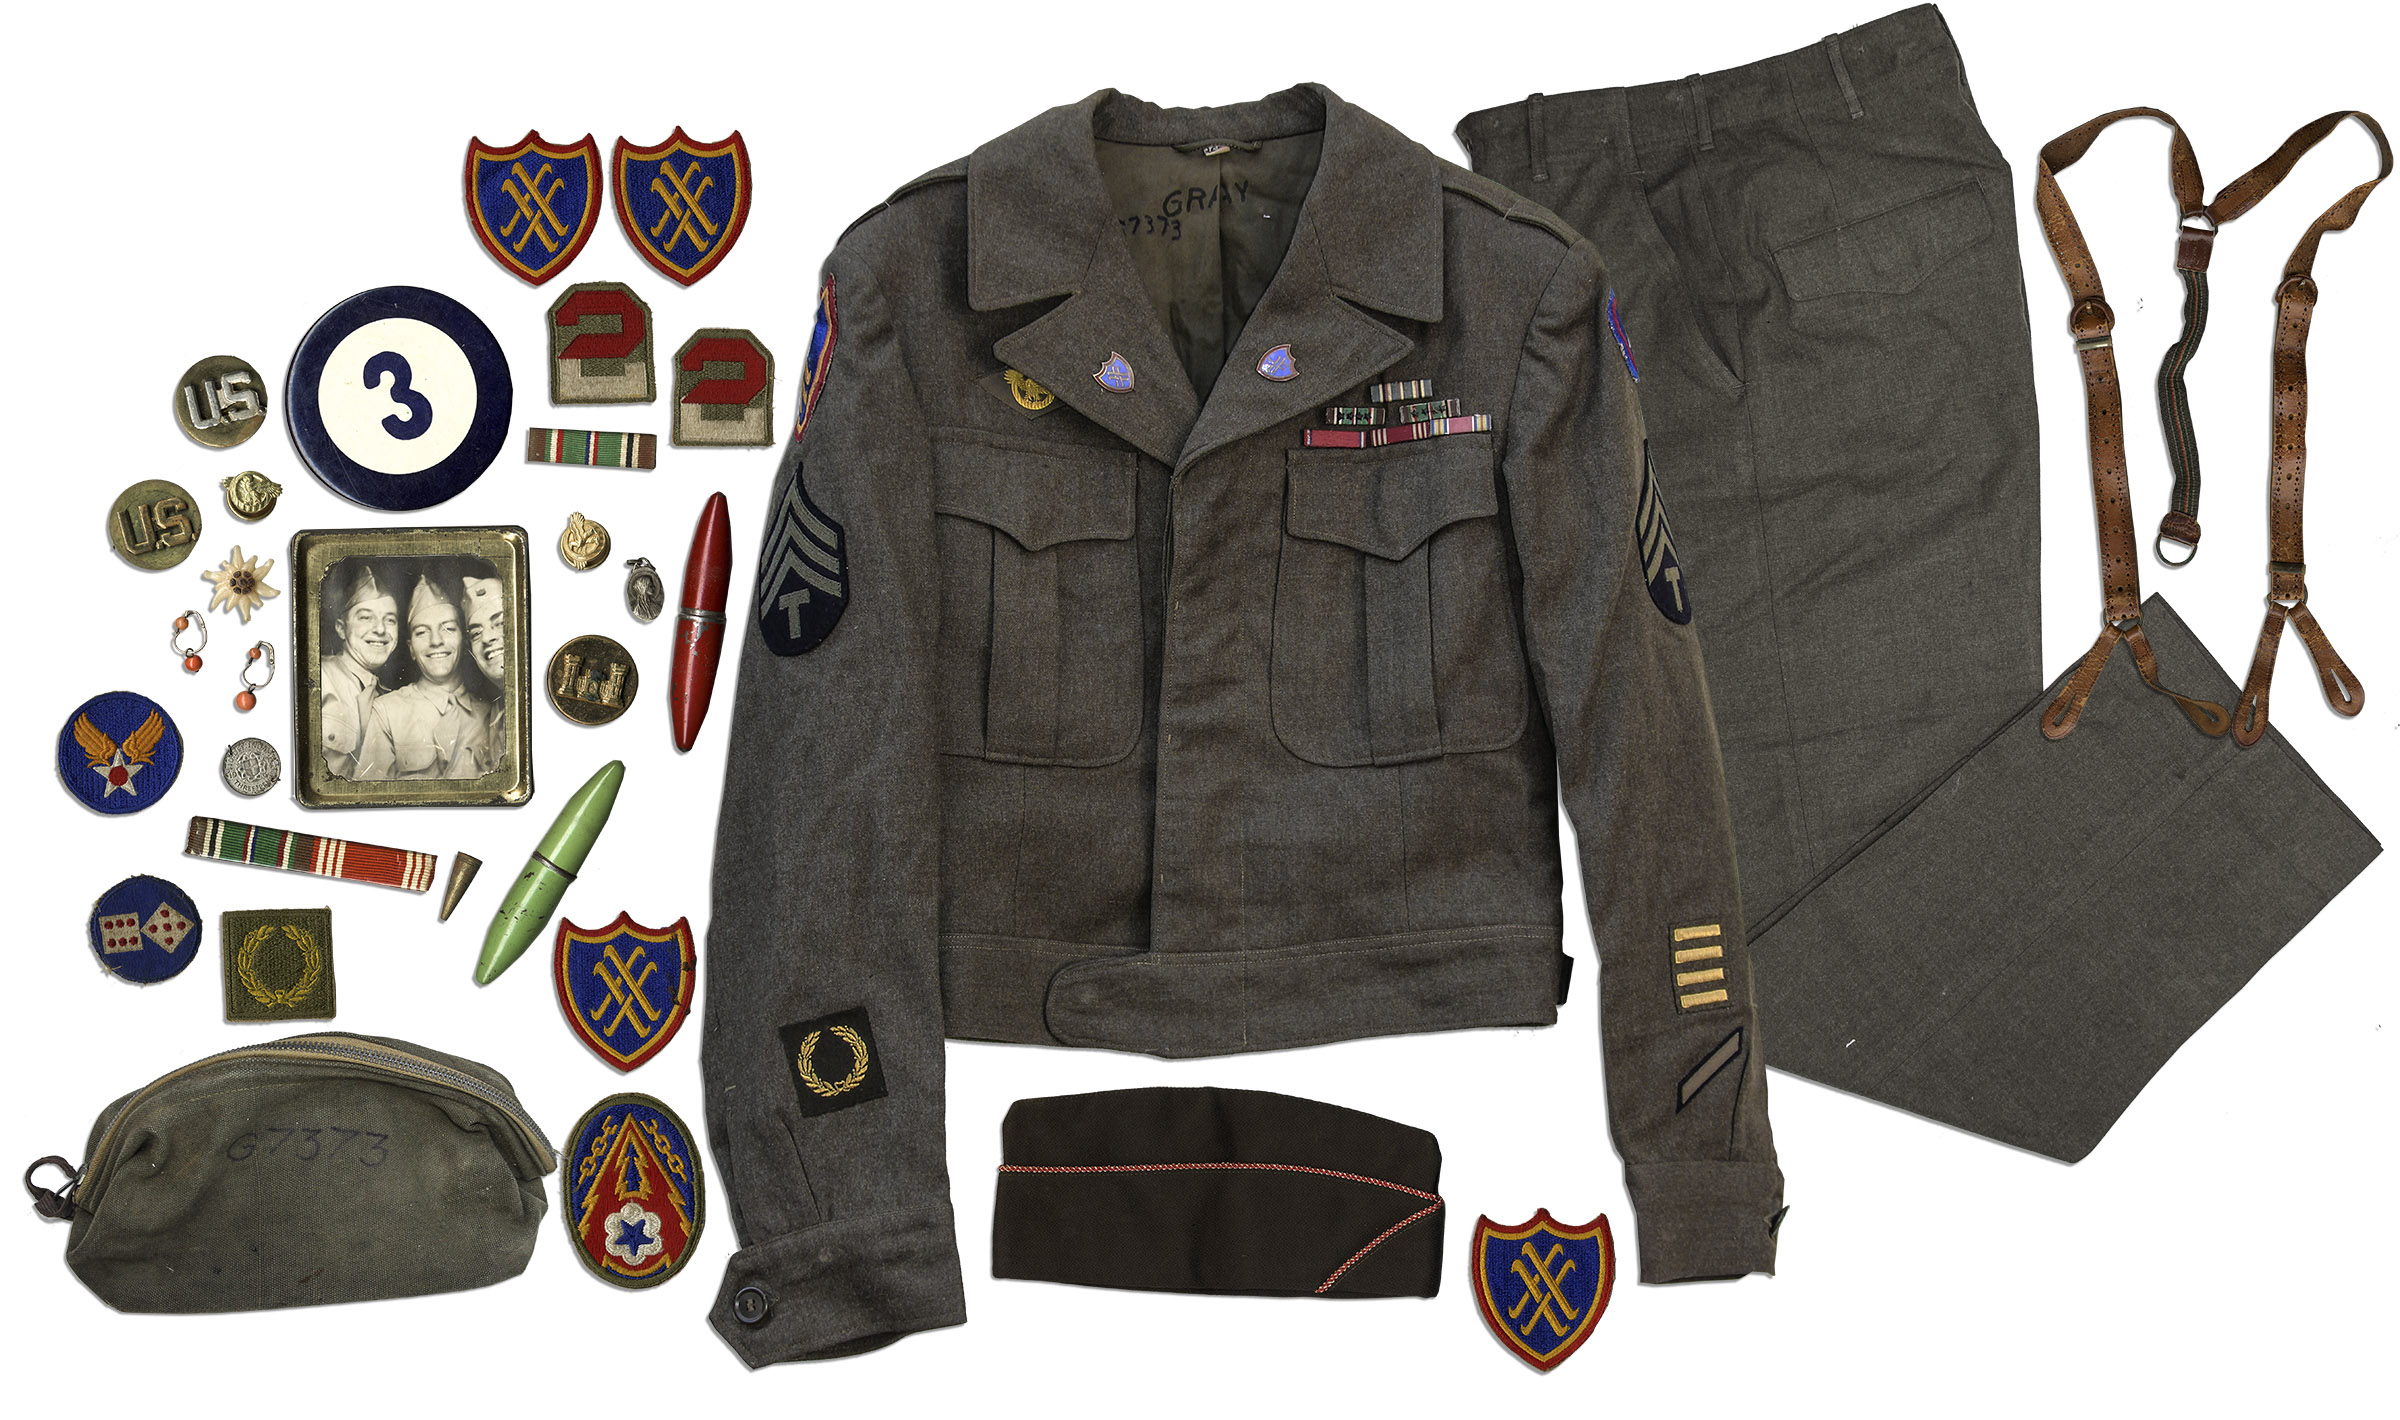 World War I & II Unique Collection of World War II Items Including a Full Uniform Worn by a Corporal